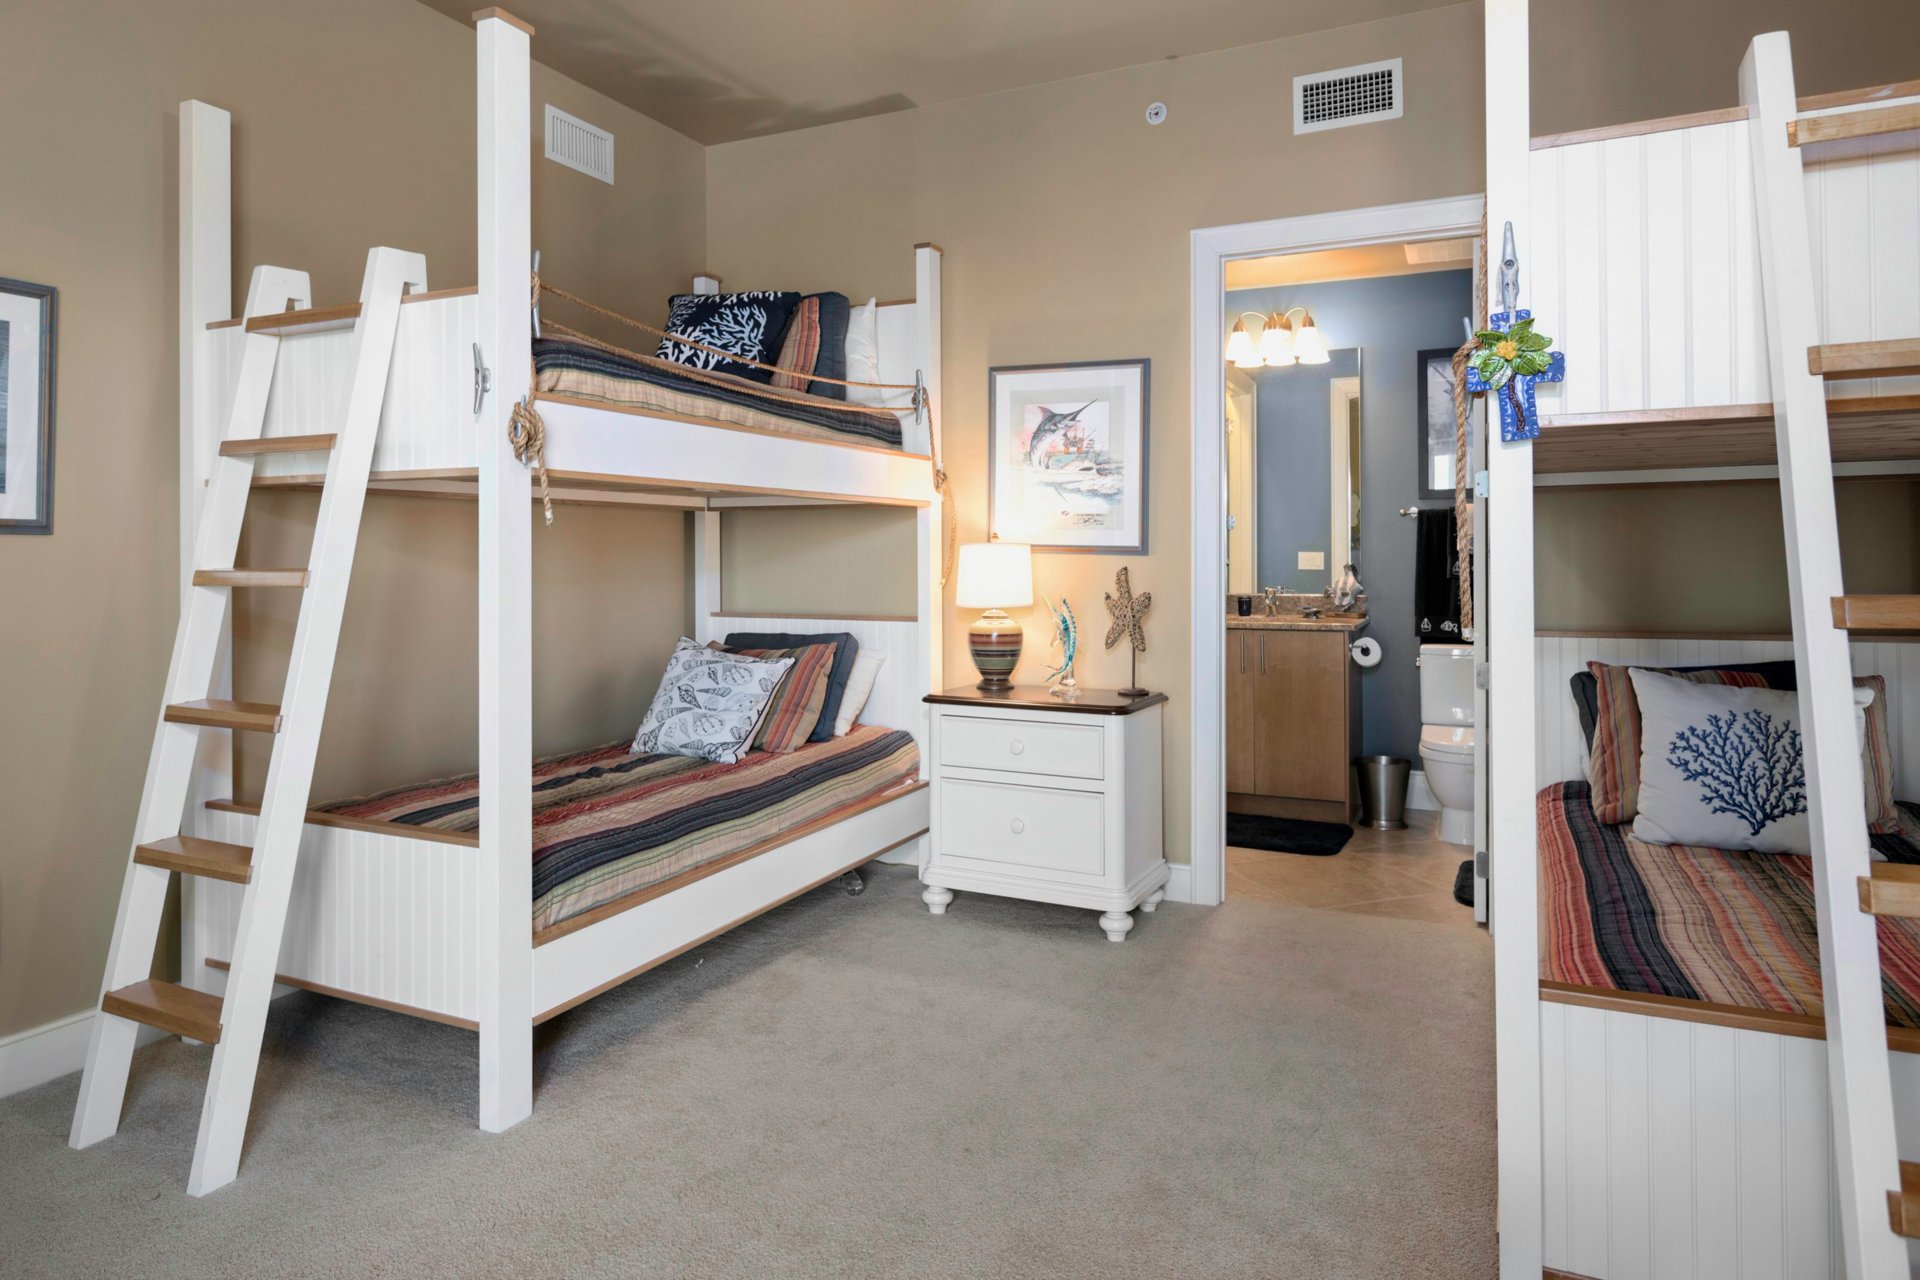 Third Guest Bedroom with Bunks